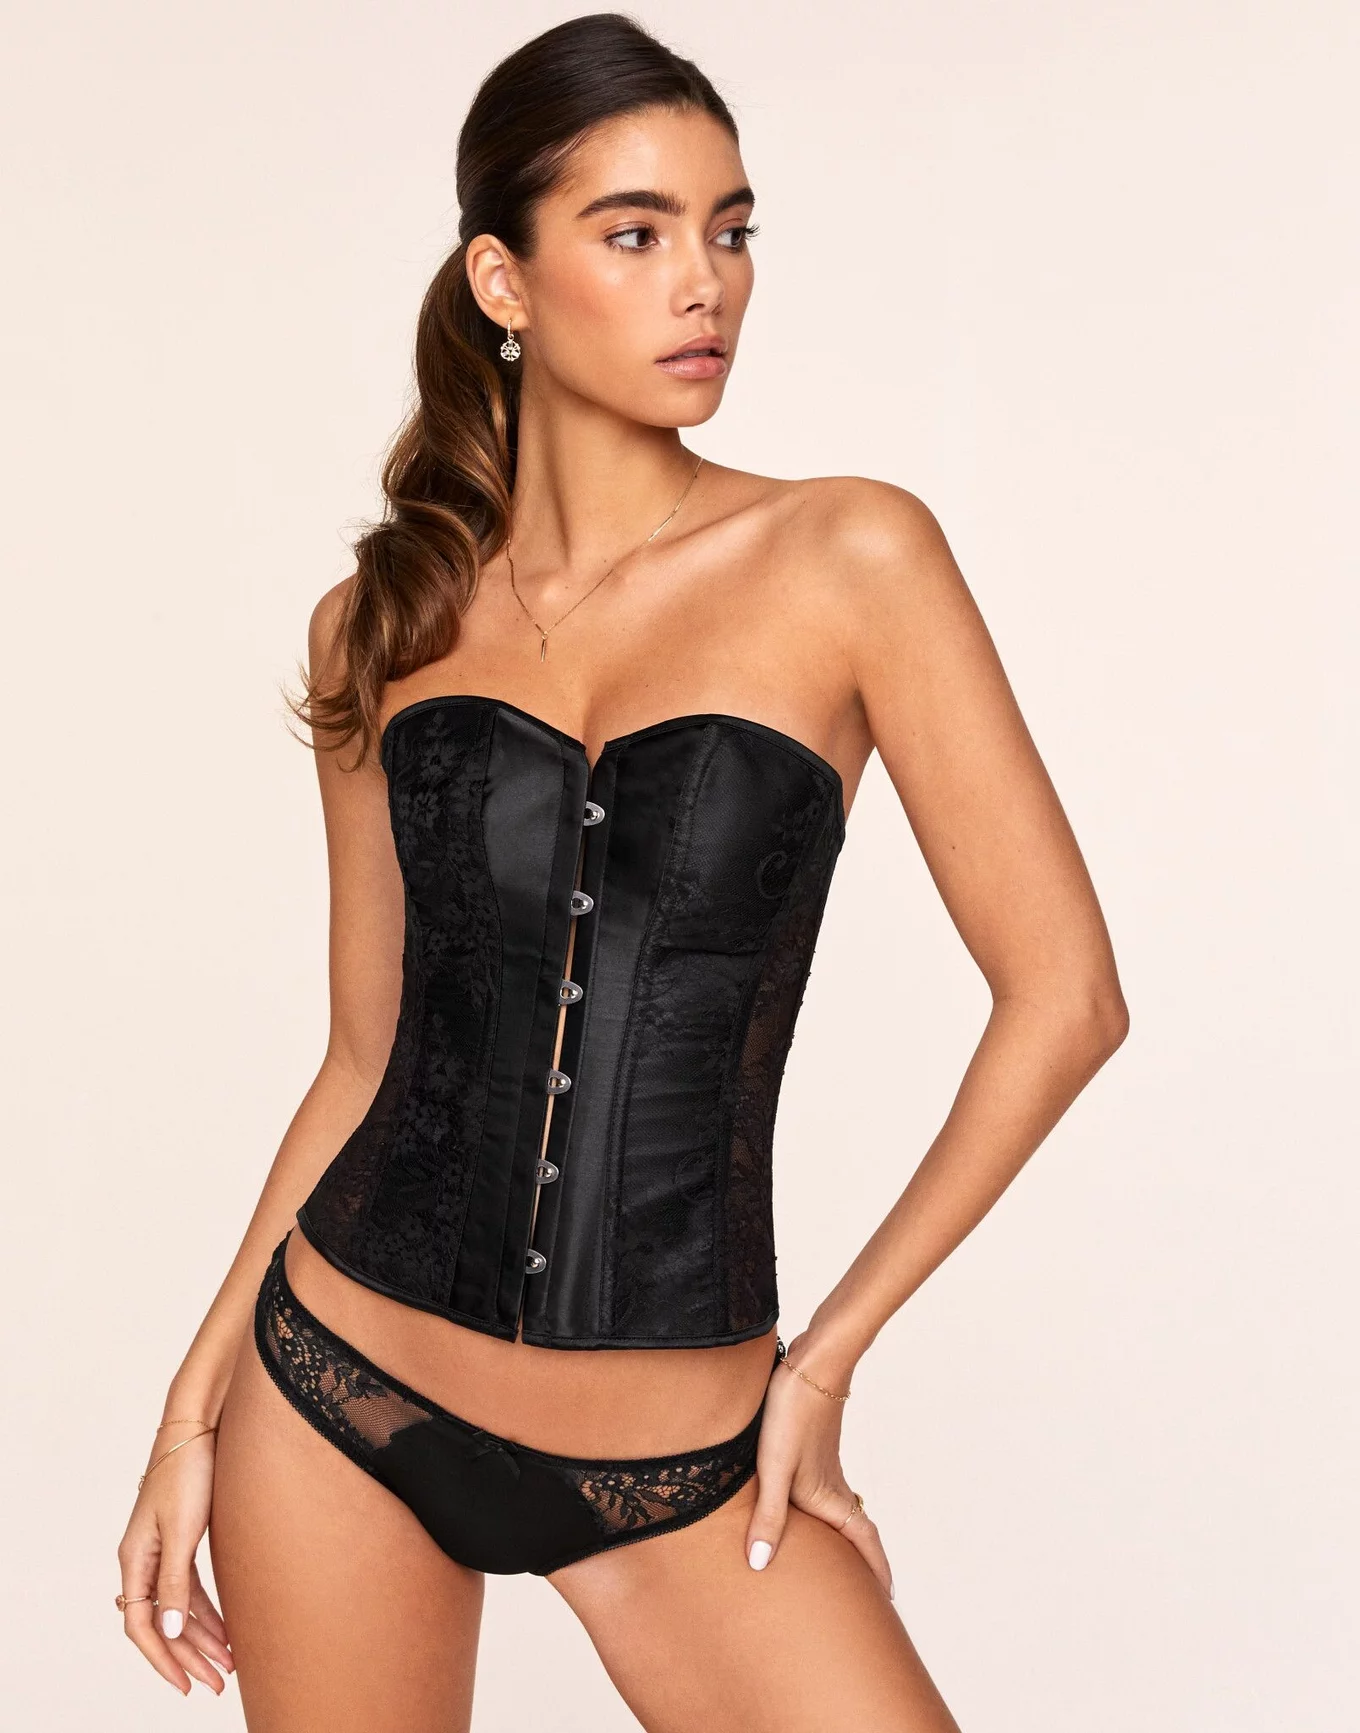 NWT ADORE ME Black Lace Up Corset with Floral Detailing Boning Ruffle Trim  sz S